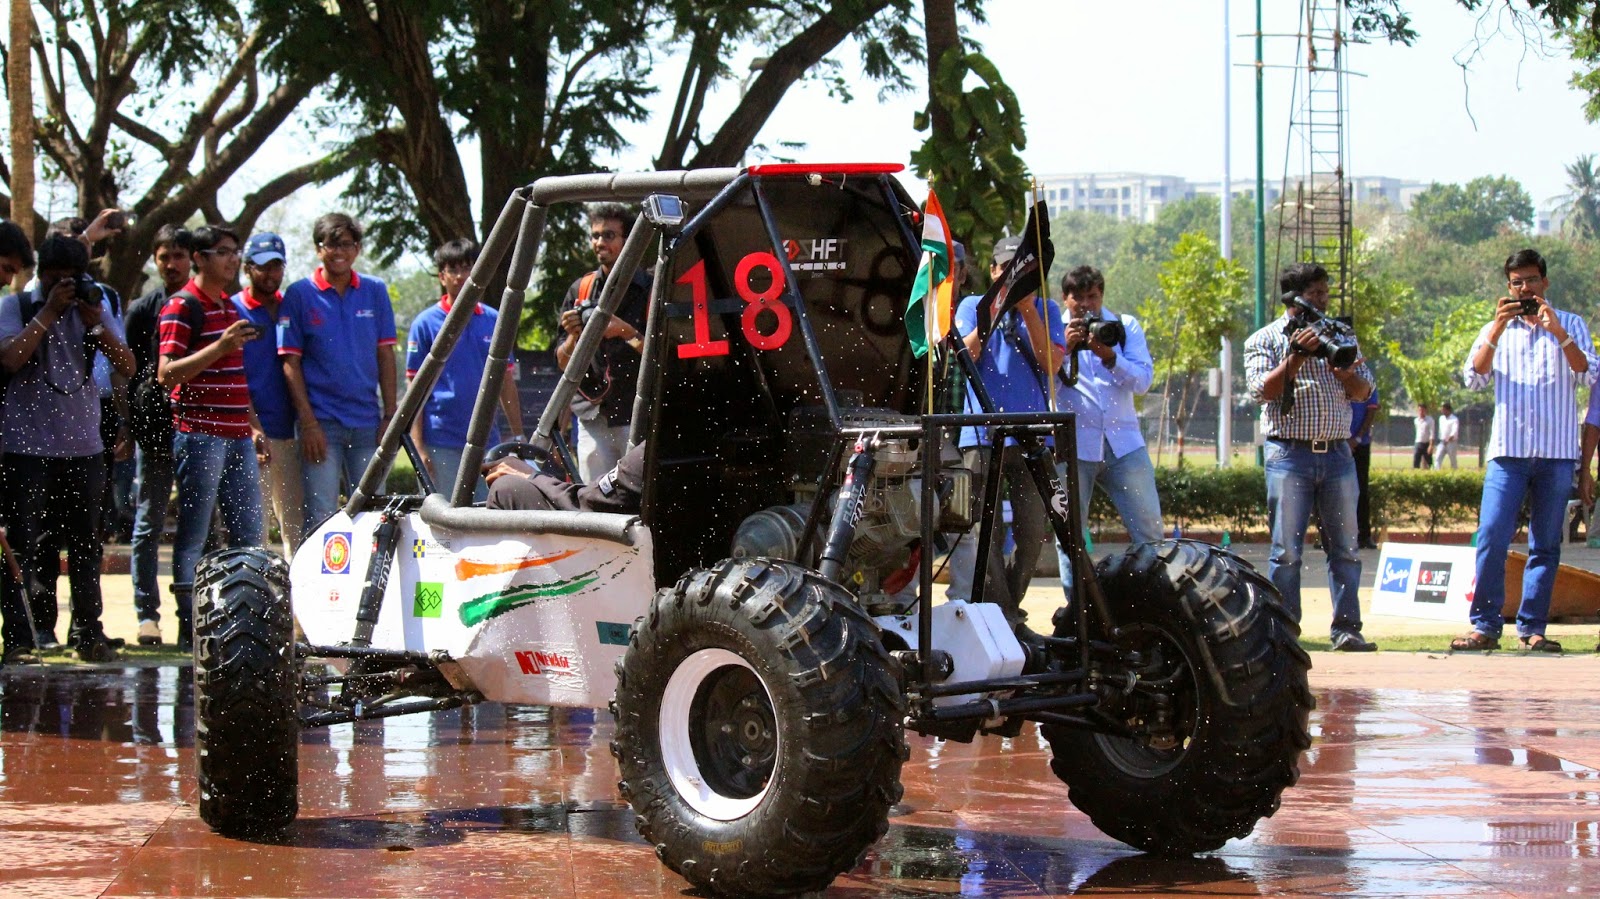 TEAM RED SHIFT OF K. J. SOMAIYA COLLEGE OF ENGINEERING ROLLS OUT THE ALL TERRAIN VEHICLE – RAUDR